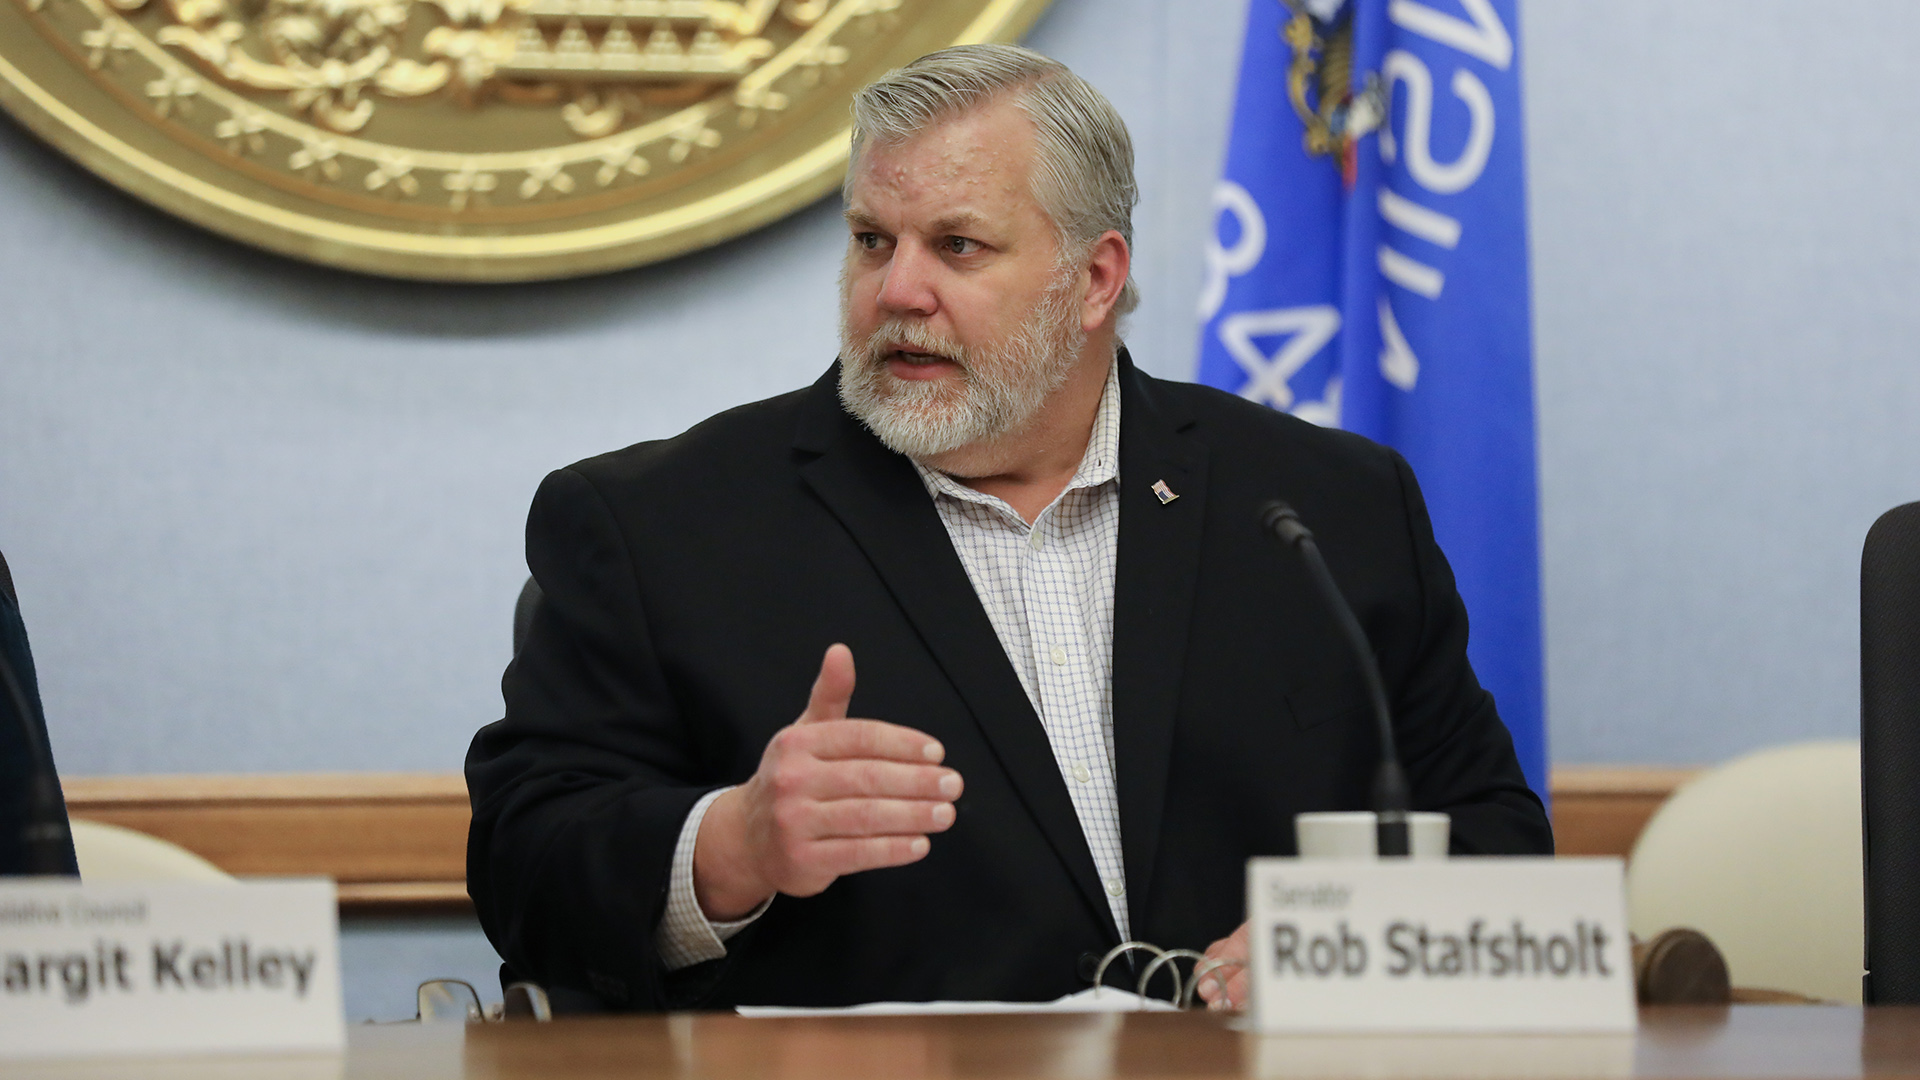 Rob Stafholt sits at a desk and speaks while gesturing with his right hand, with a paper name label and mounted microphone in front of him and a Wisconsin flag in the background.